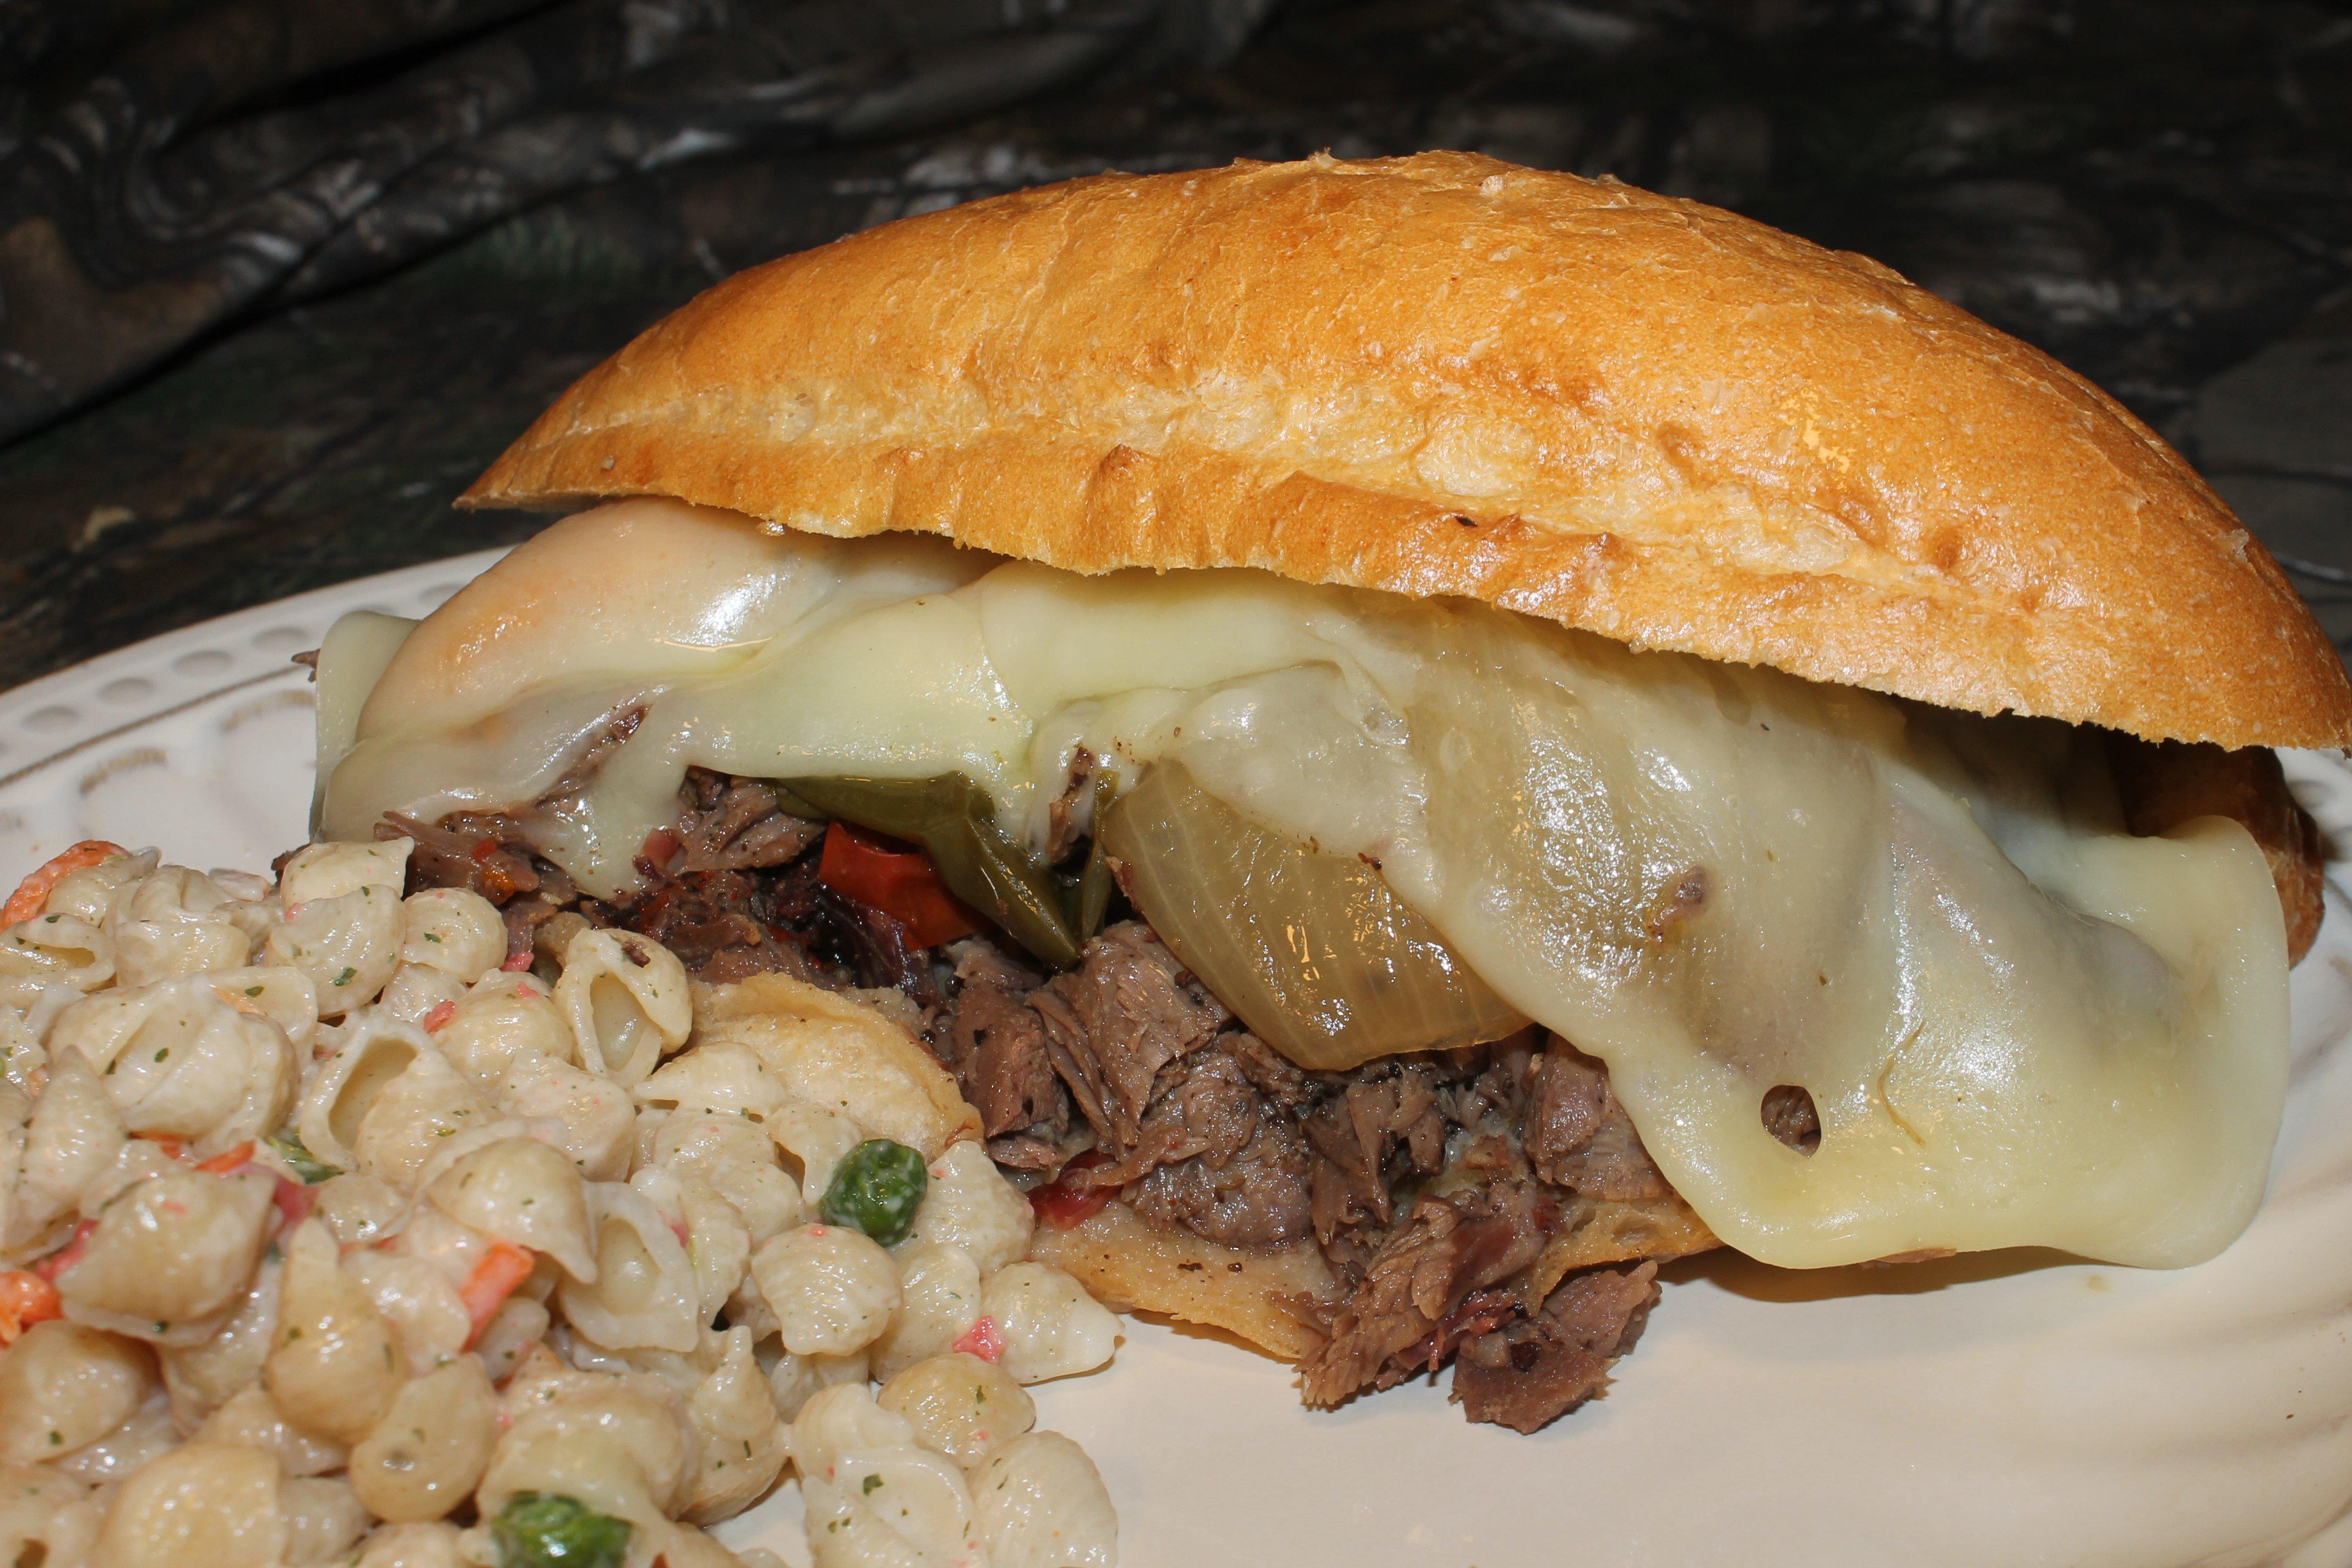 Serve on a bun for a smoky Philly Cheesesteak style sandwich.